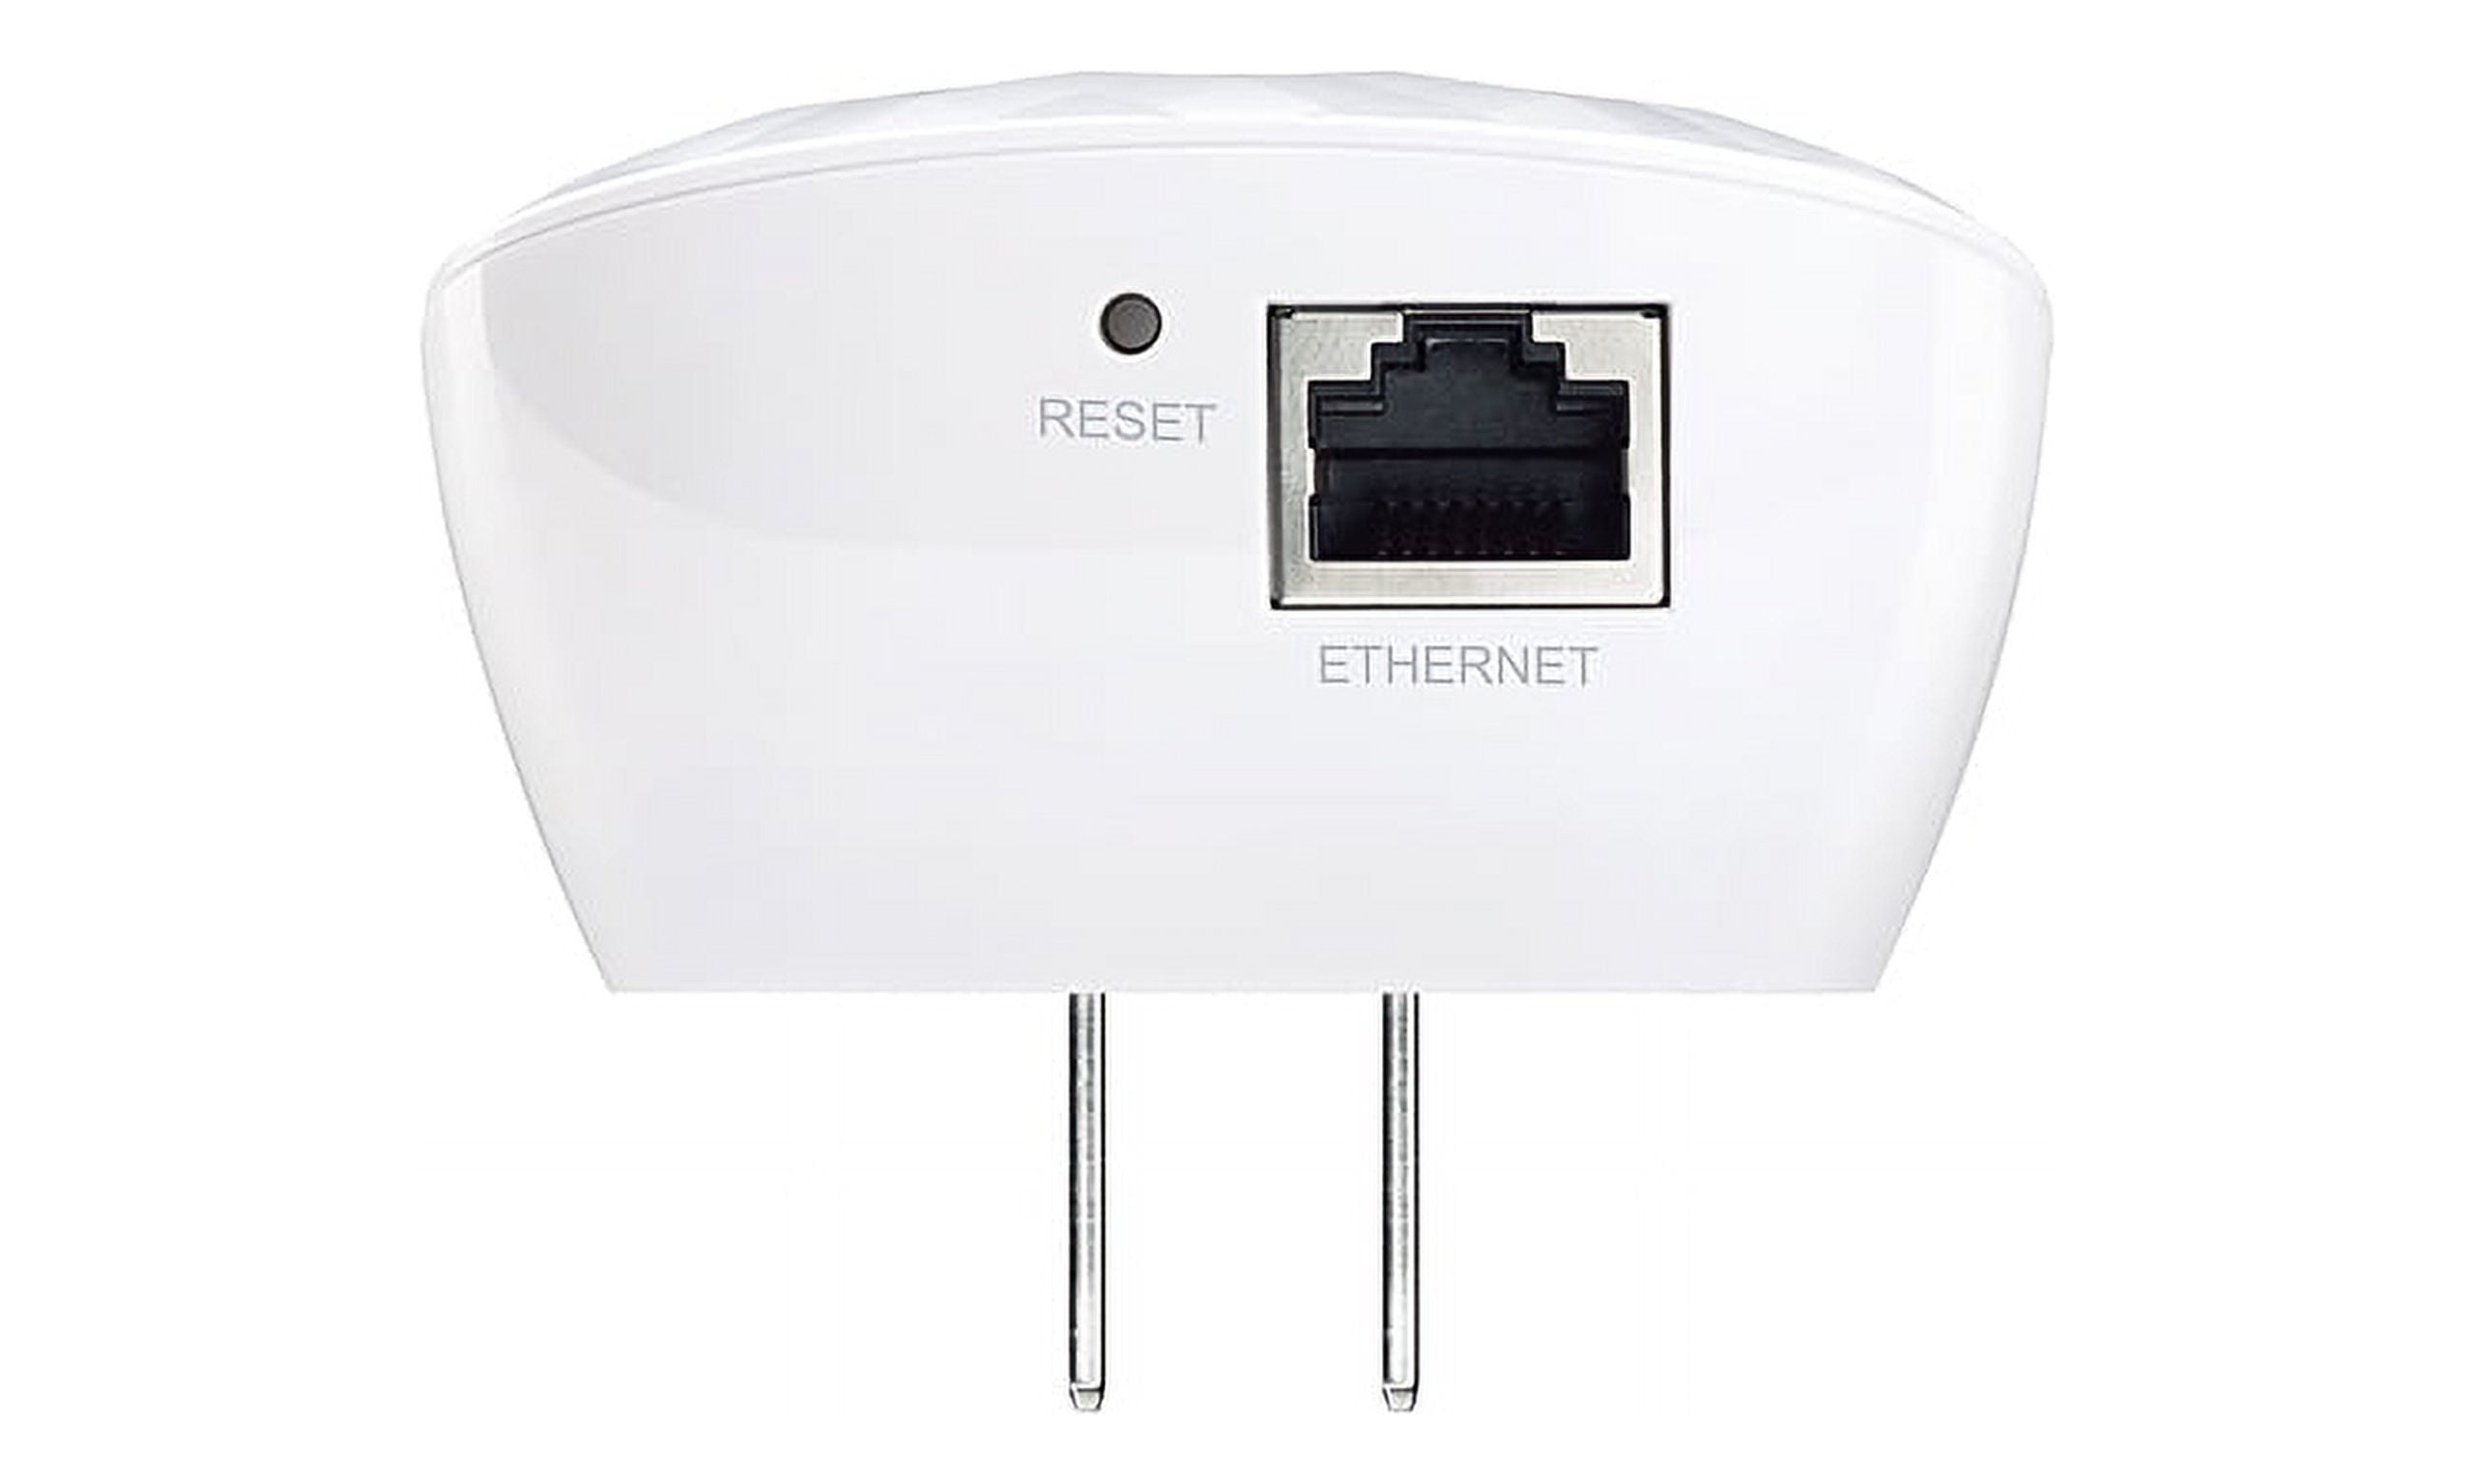 REPETIDOR WIFI TP-LINK RE200 AC750 5Ghz